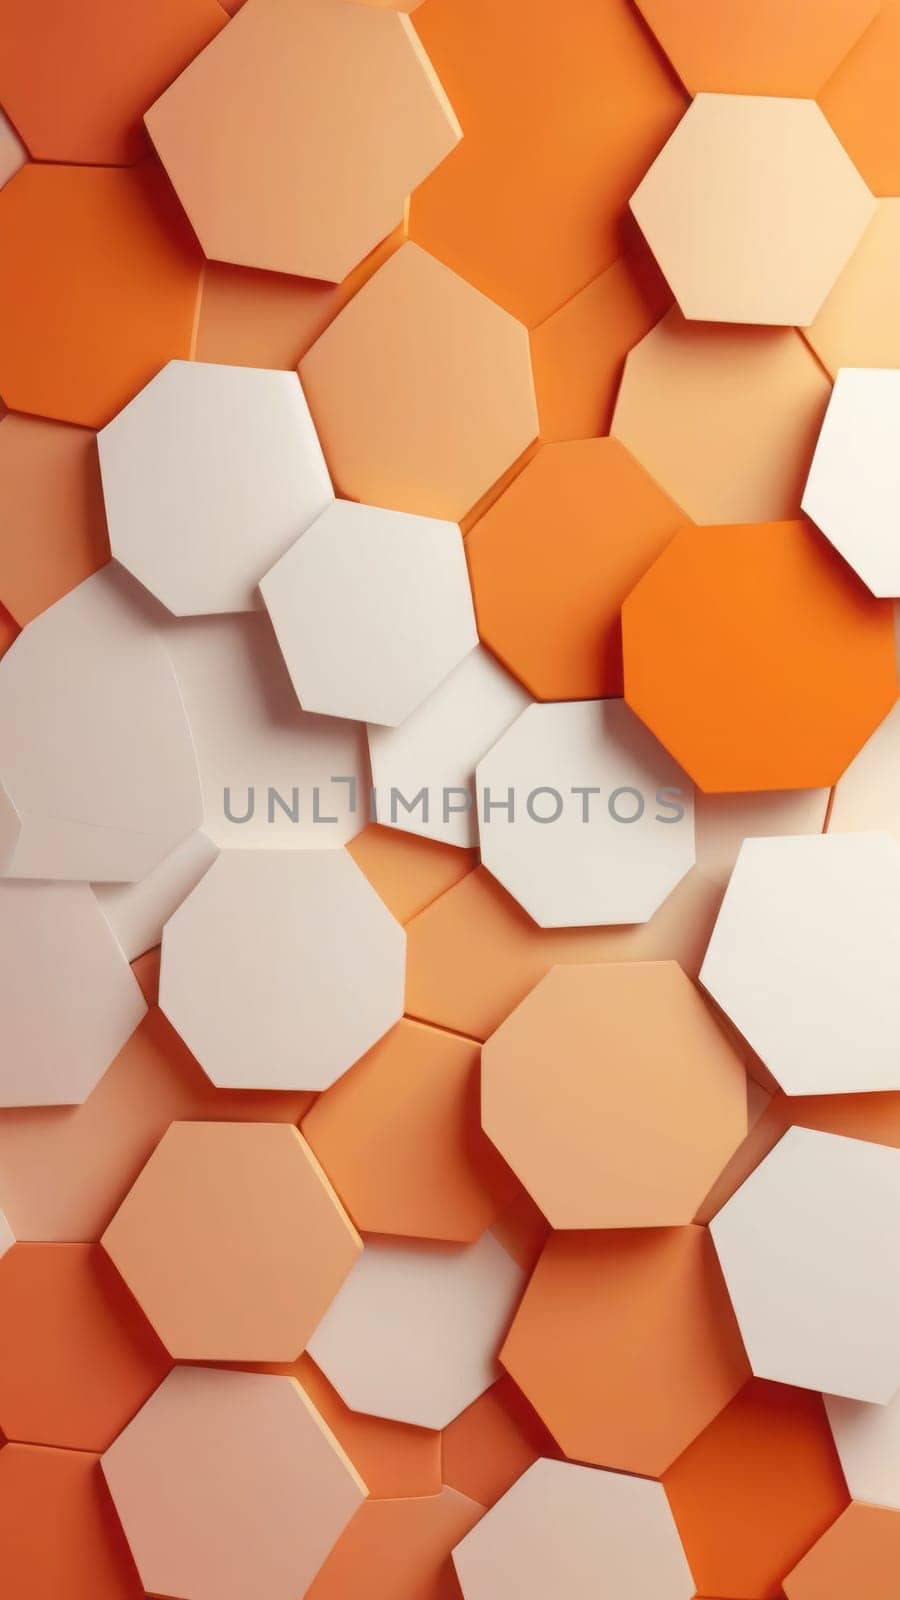 Screen background from Hexagonal shapes and white by nkotlyar